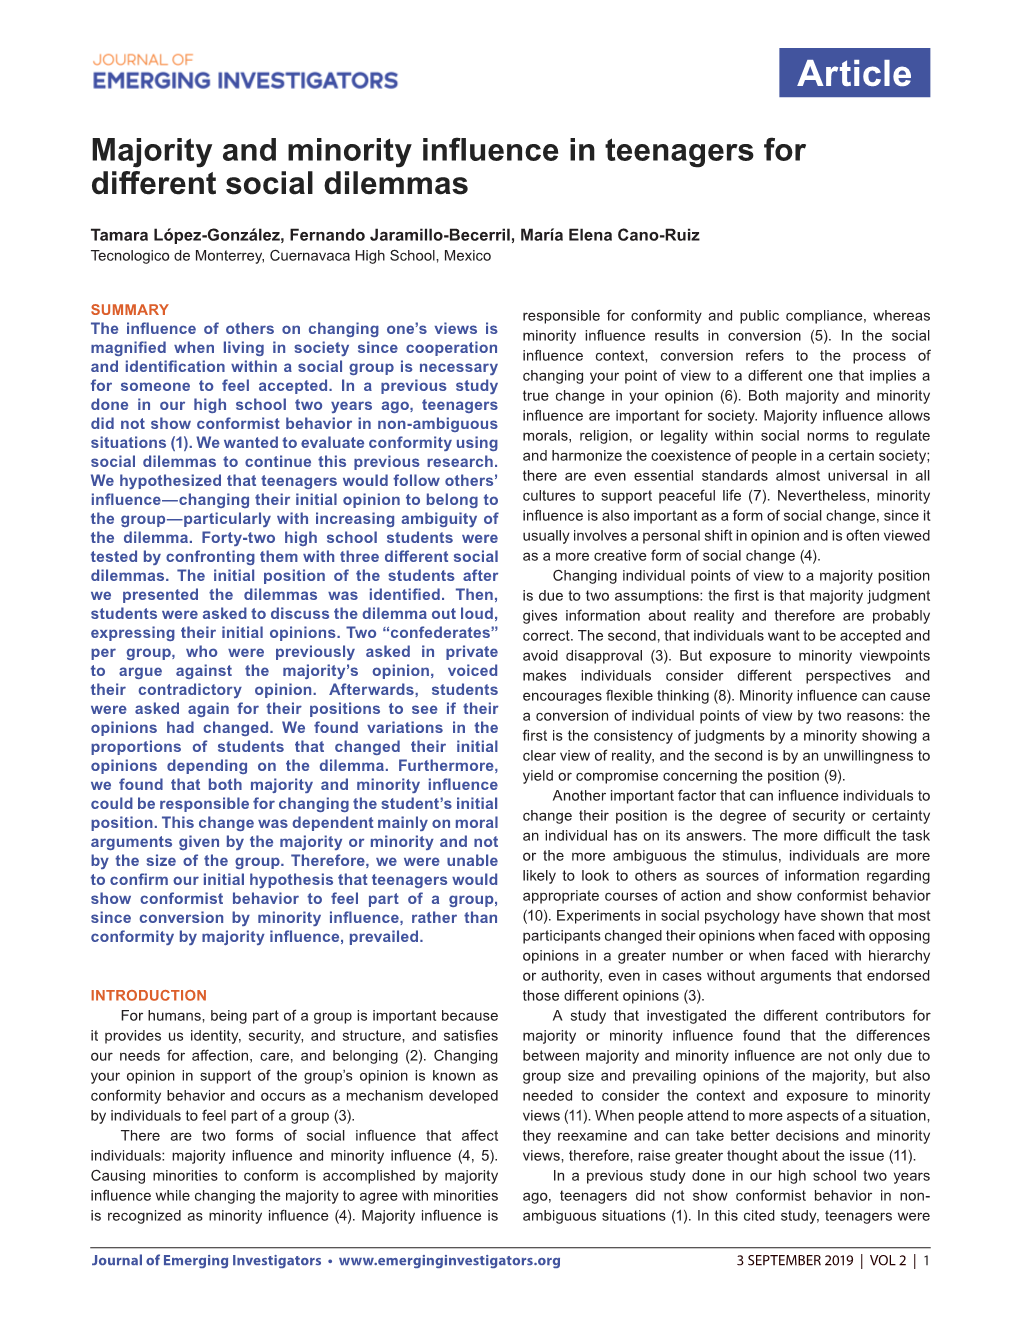 Majority and Minority Influence in Teenagers for Different Social Dilemmas